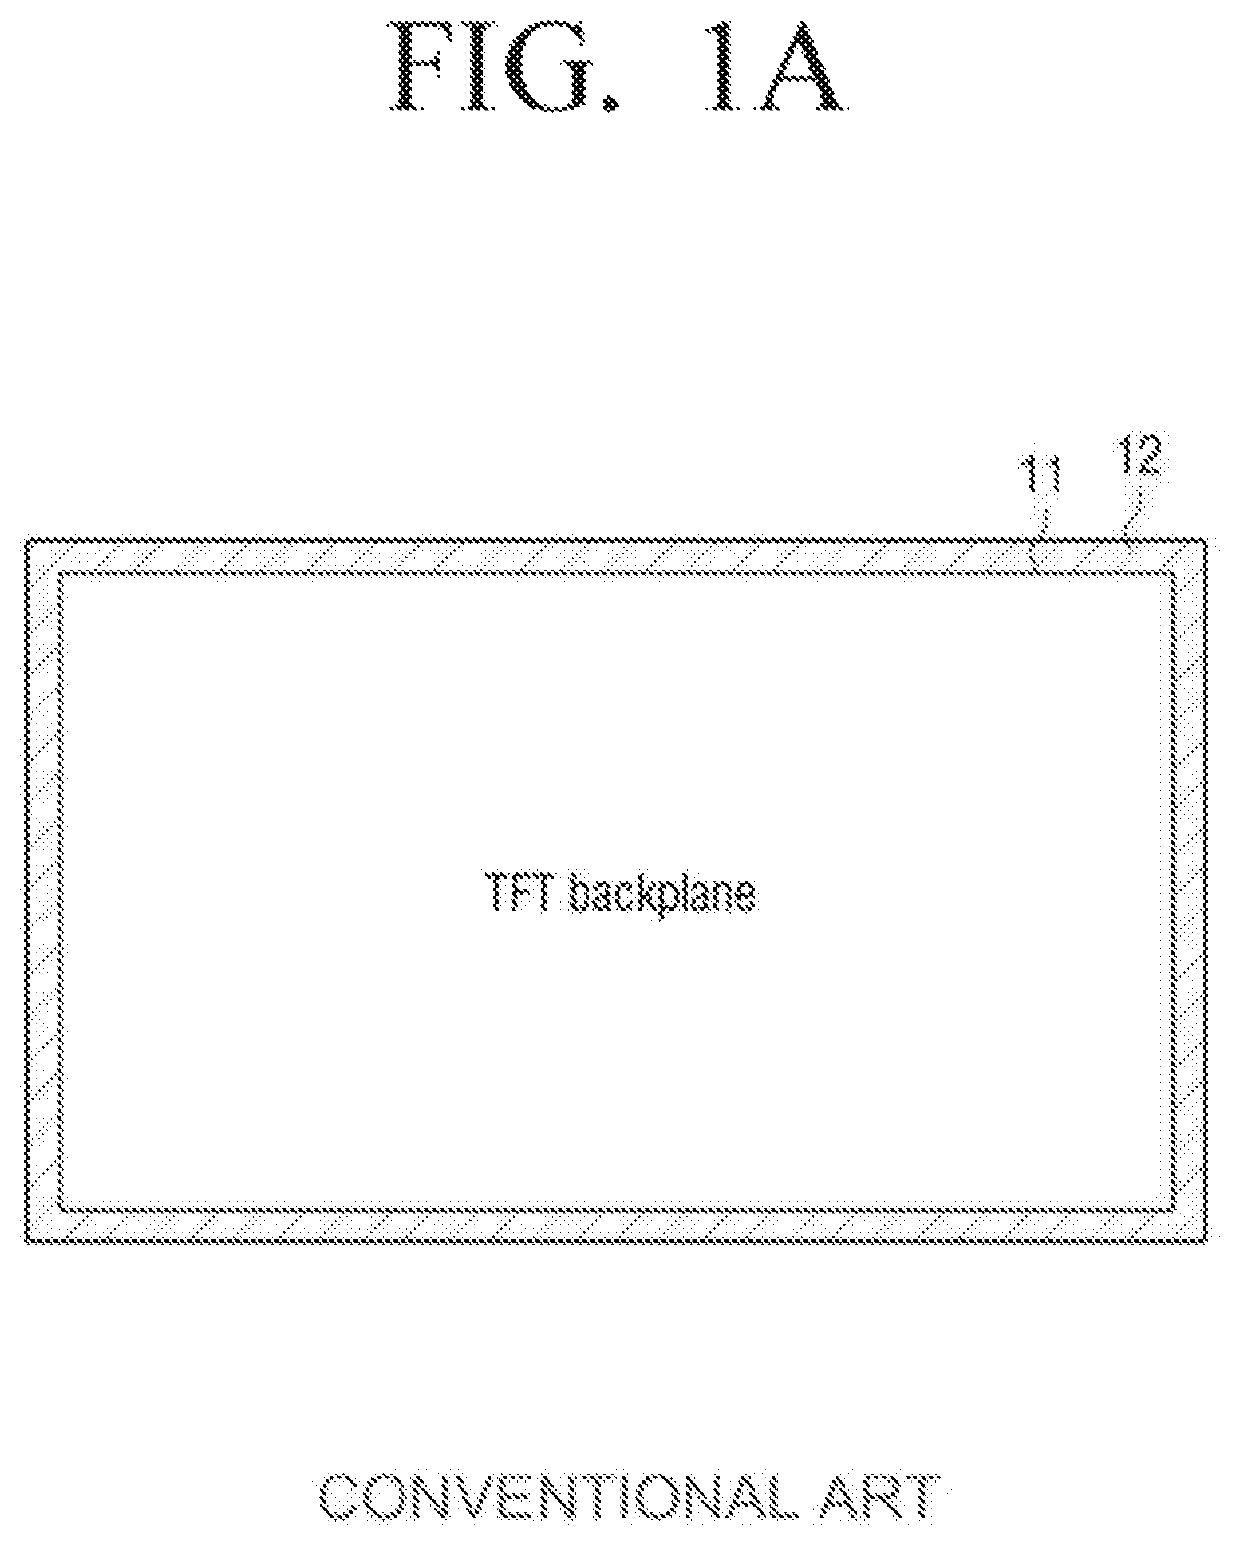 Display module including electro-static discharge protection circuit